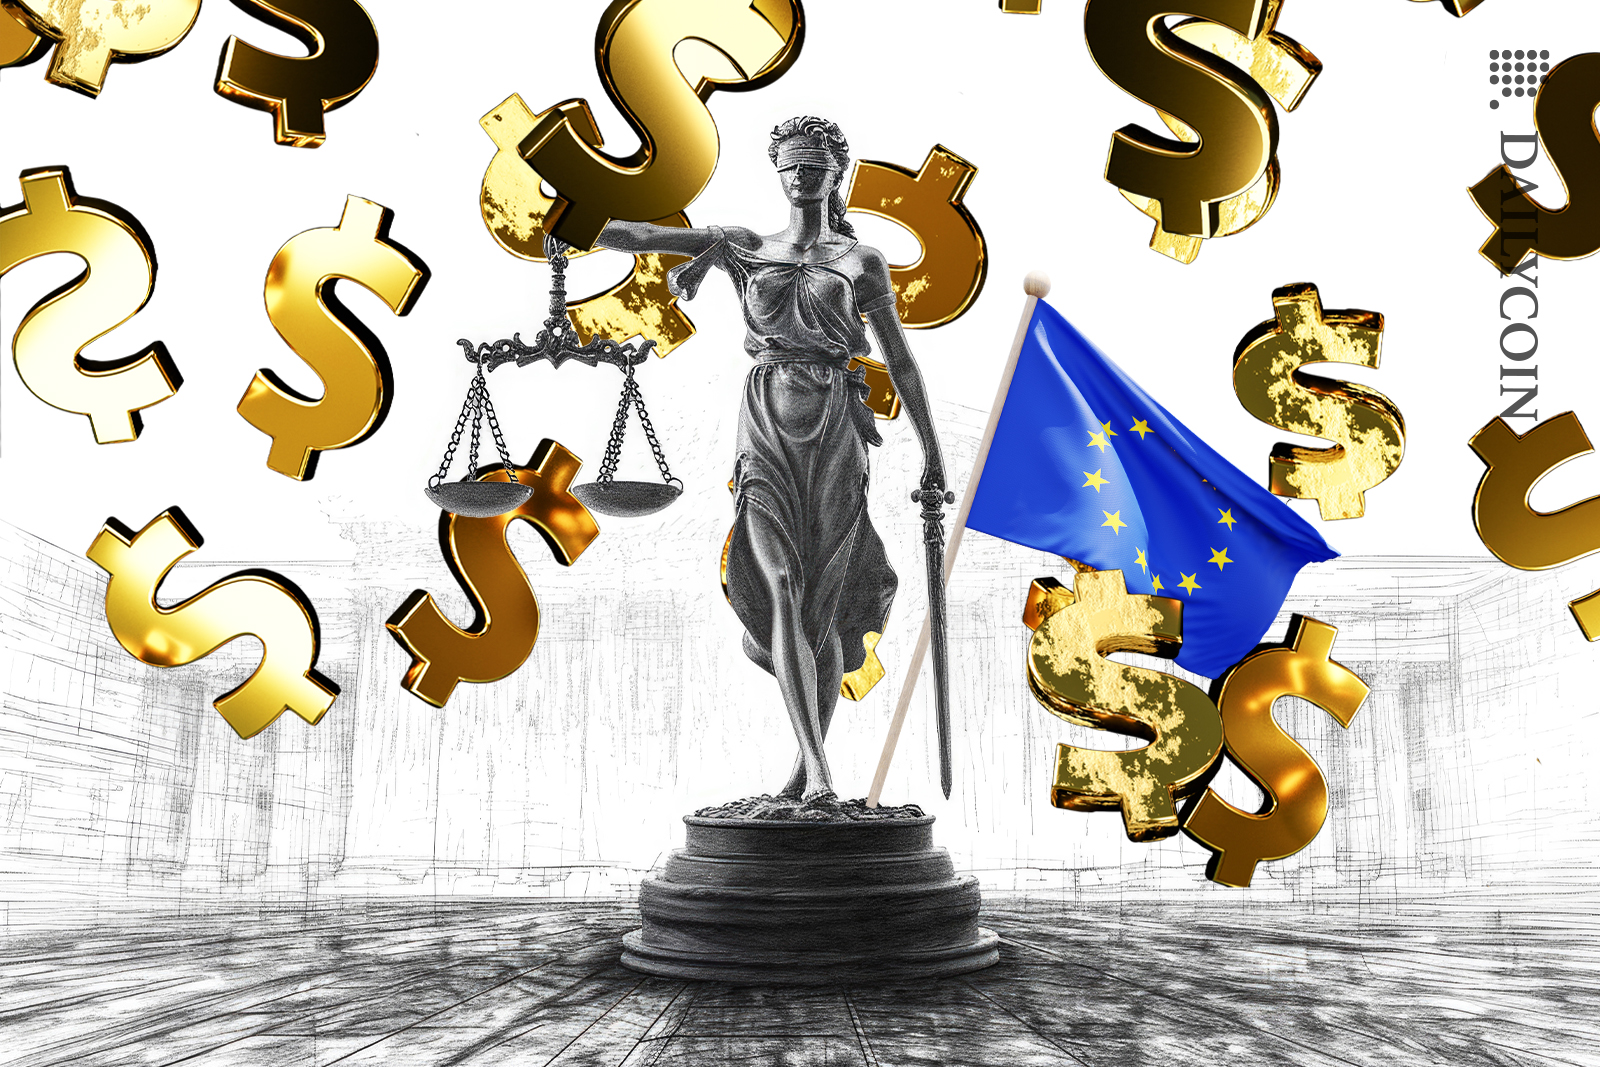 New laws and plans being drawn out in the EU for stablecoins.